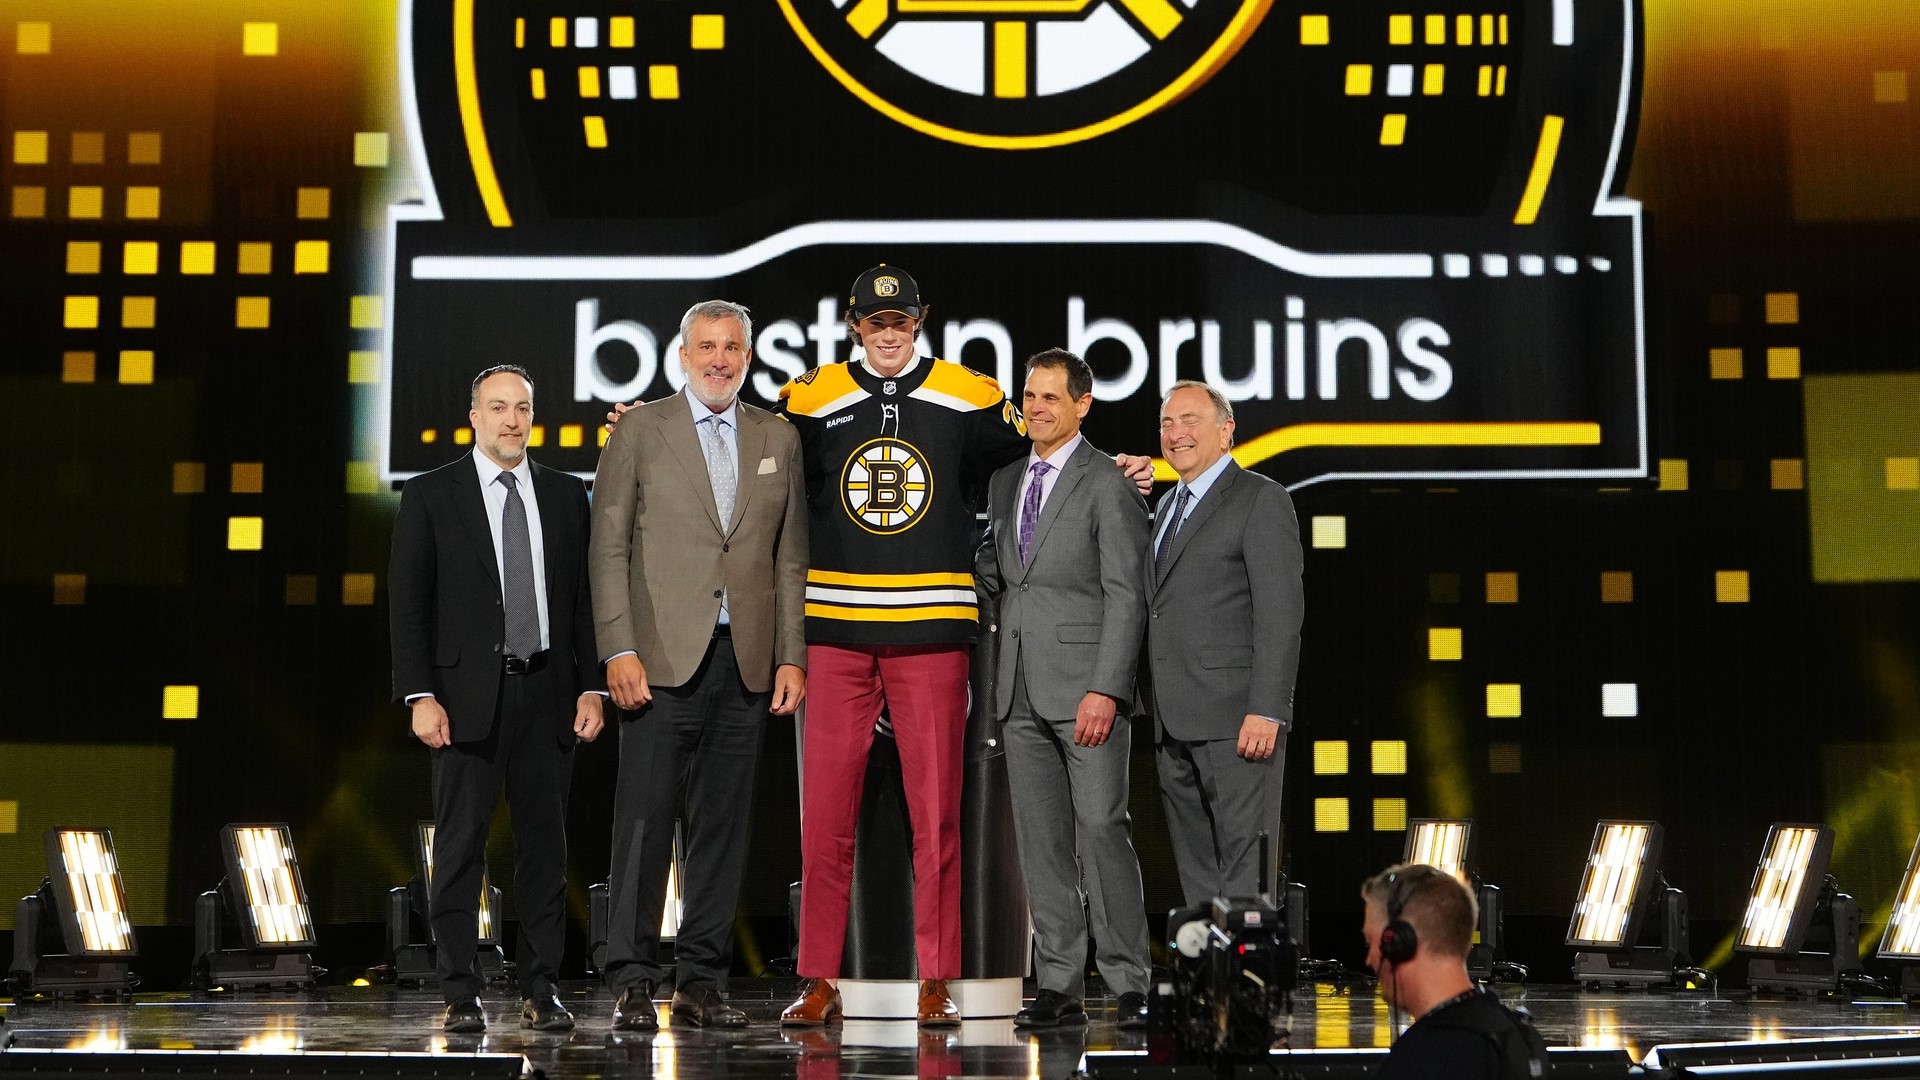 What Bruins Pick Dean Letourneau Plans To Work On Post-Draft [Video]